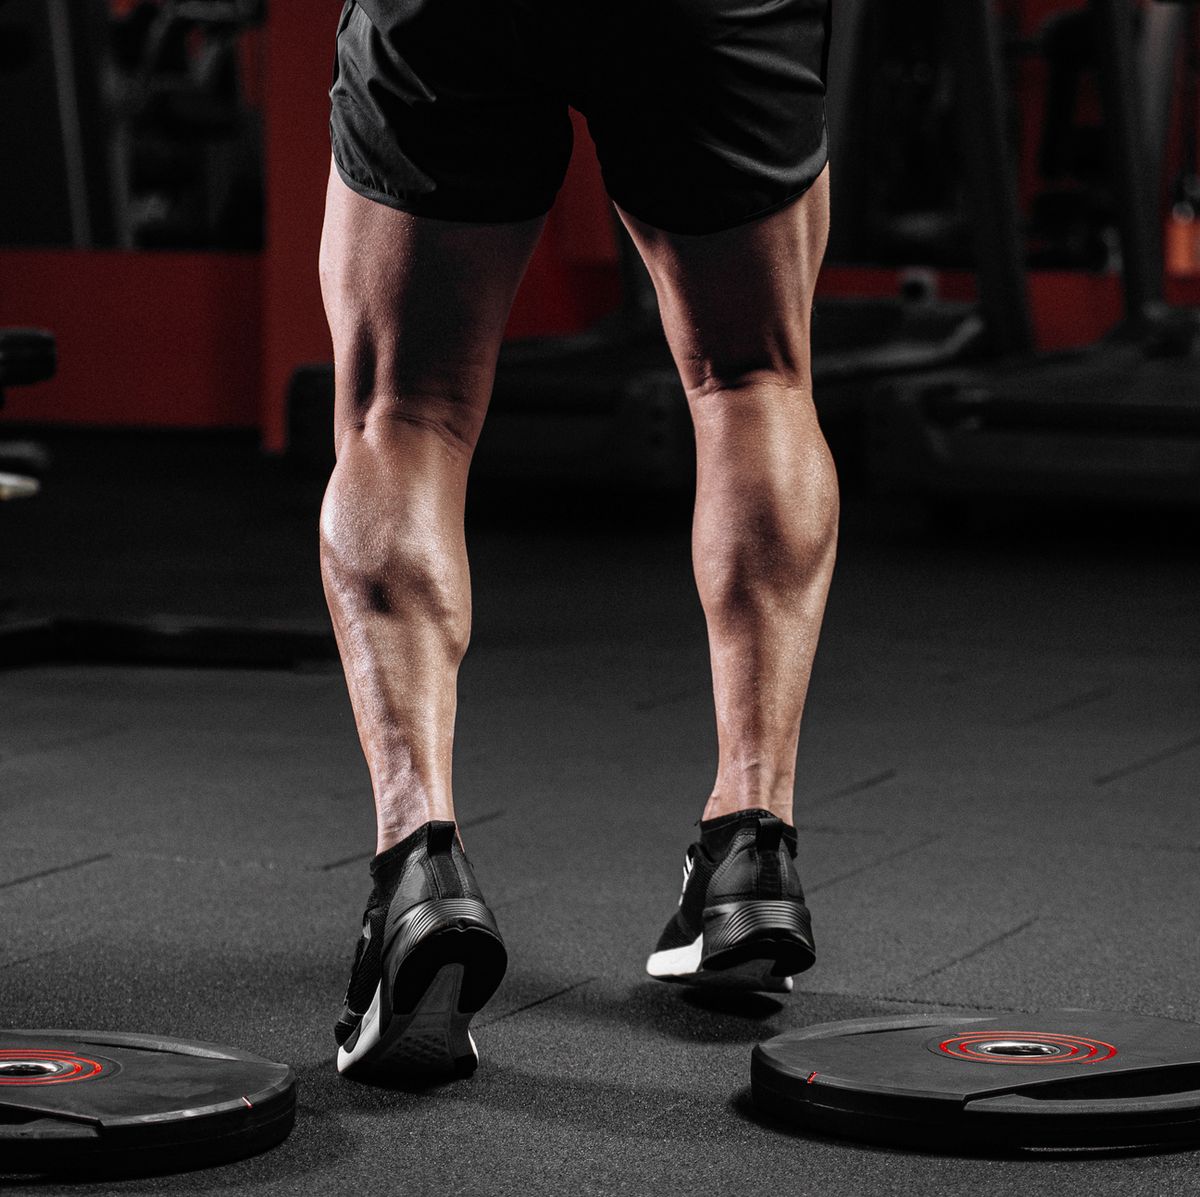 Tight Calves, Why it happens and solutions